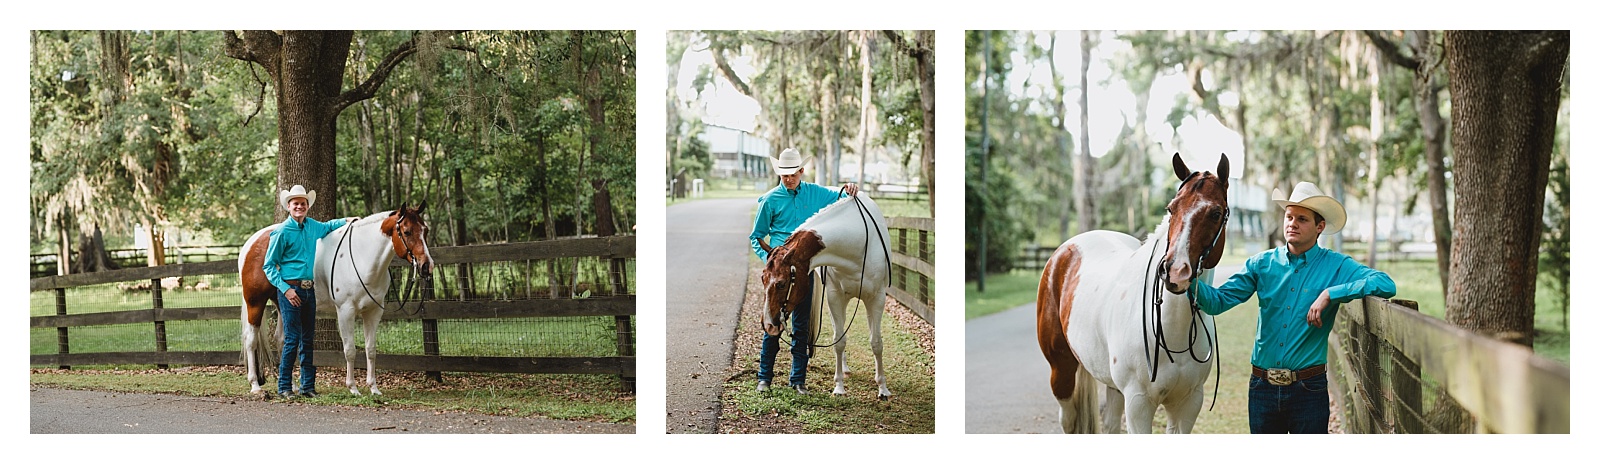 Portraits of a man with his horse.